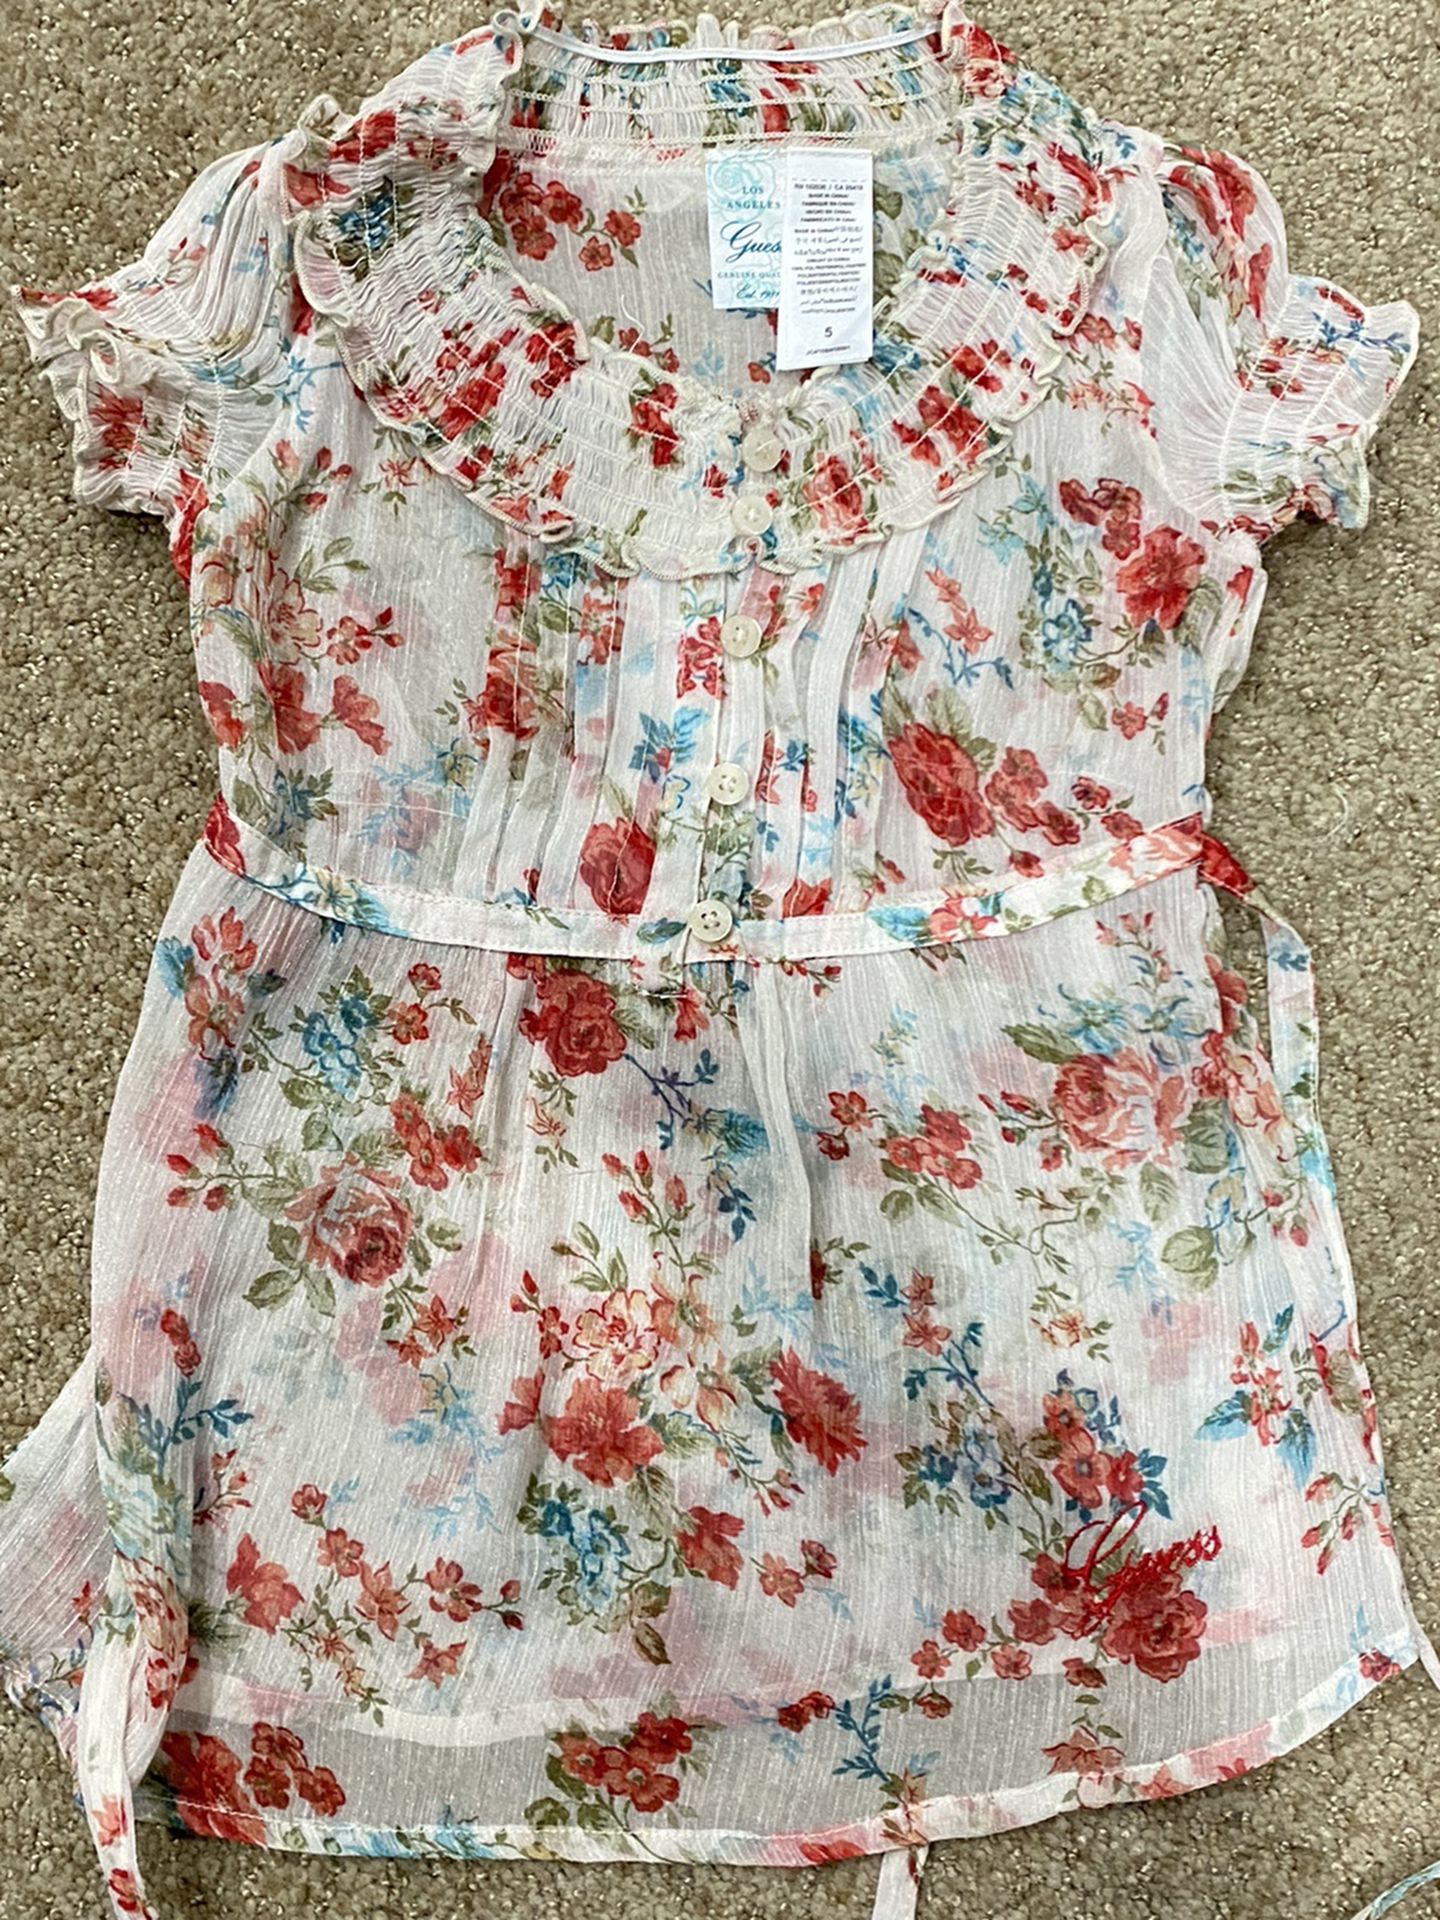 Girls Size 5 Top